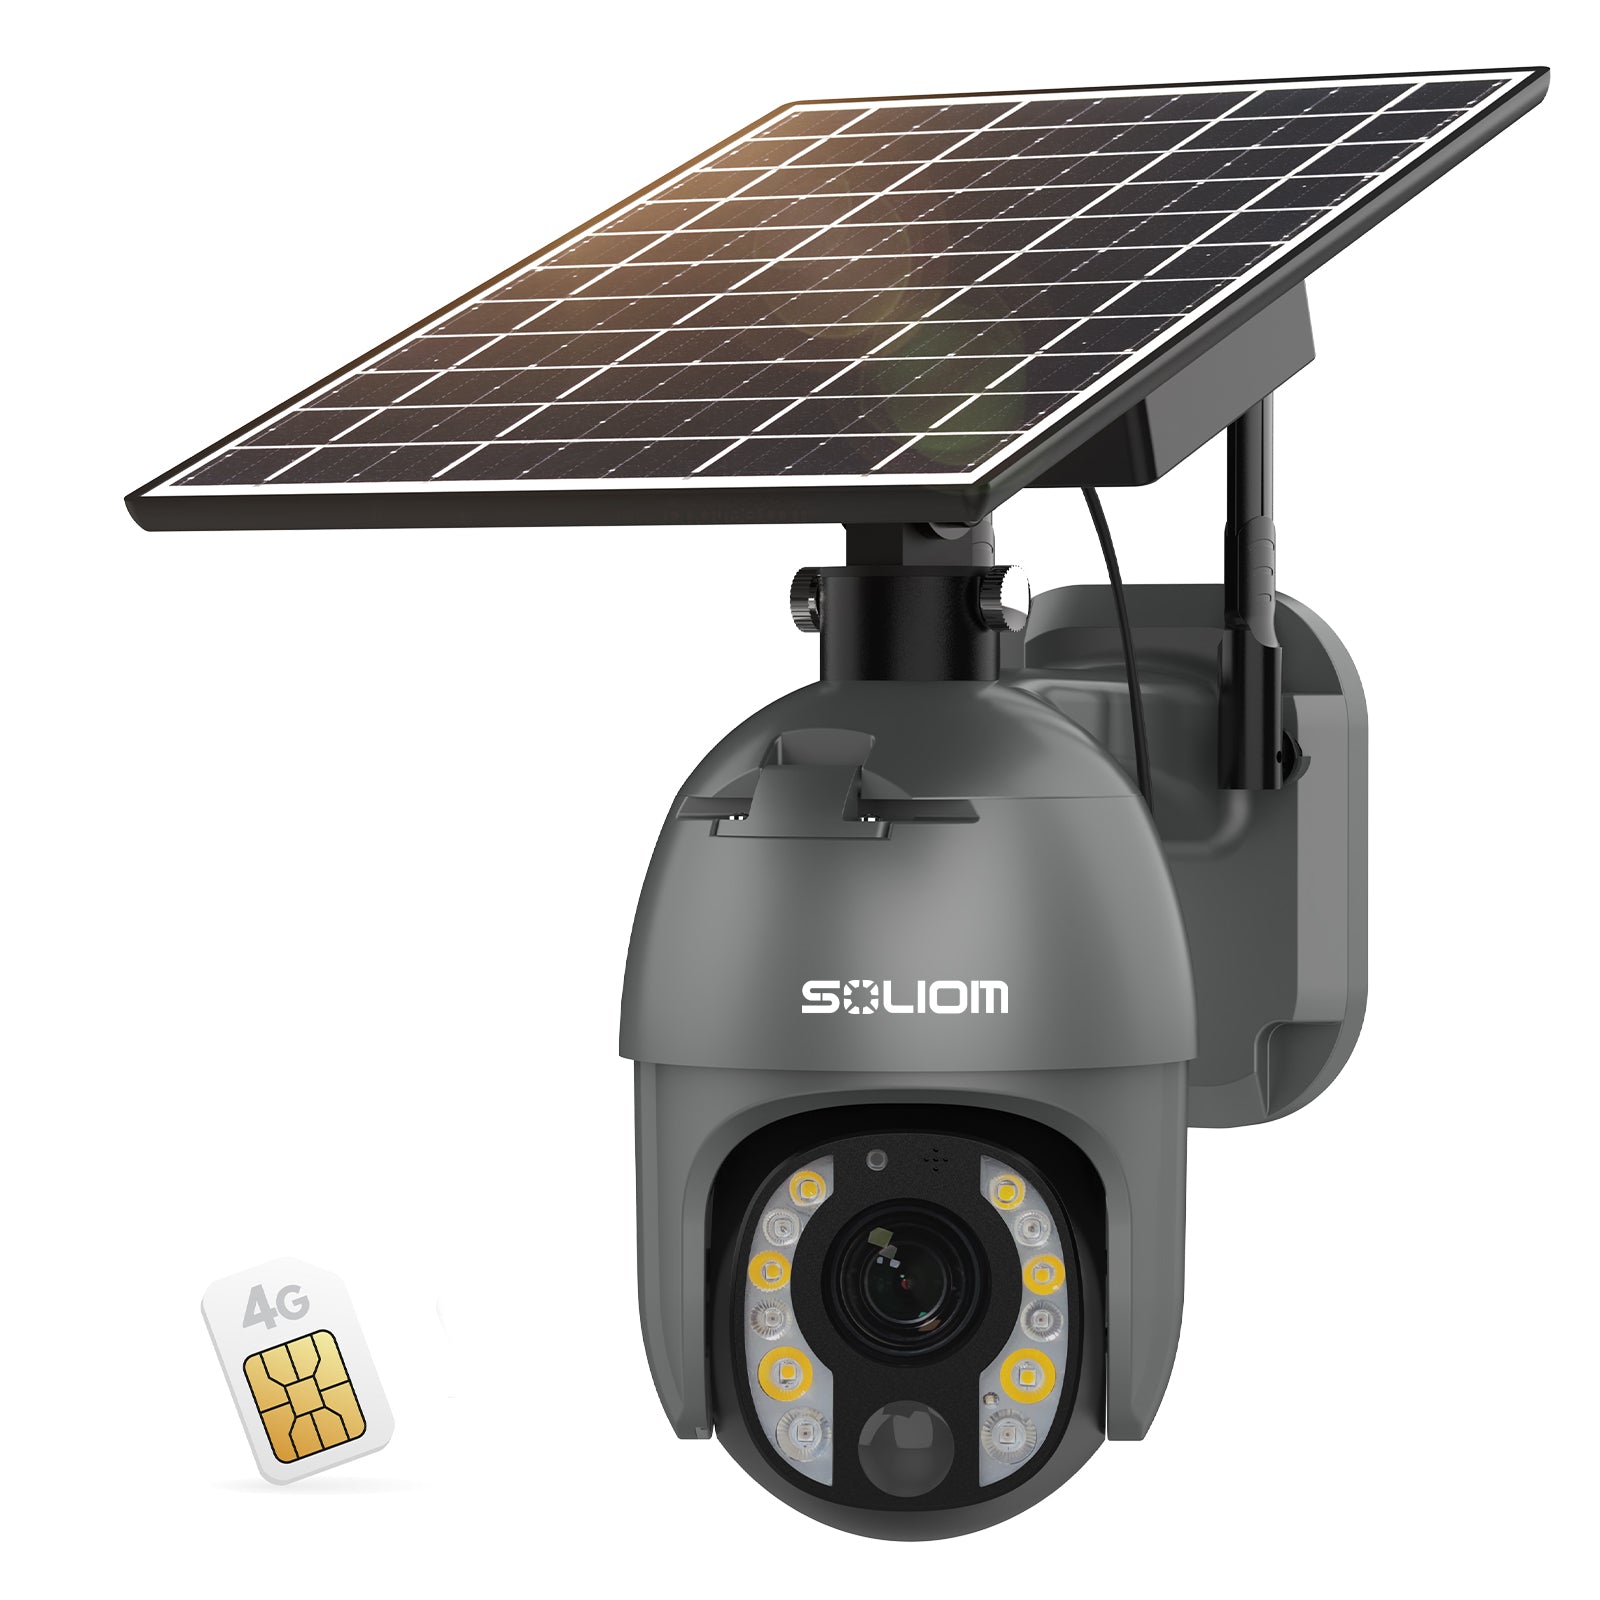 SOLIOM 5MP Security Camera Outdoor with 10X Optical Zoom-4G LTE Cellular- Battery and Solar Powered, Human Detection, Auto Tracking, Spotlight Color Night Vision